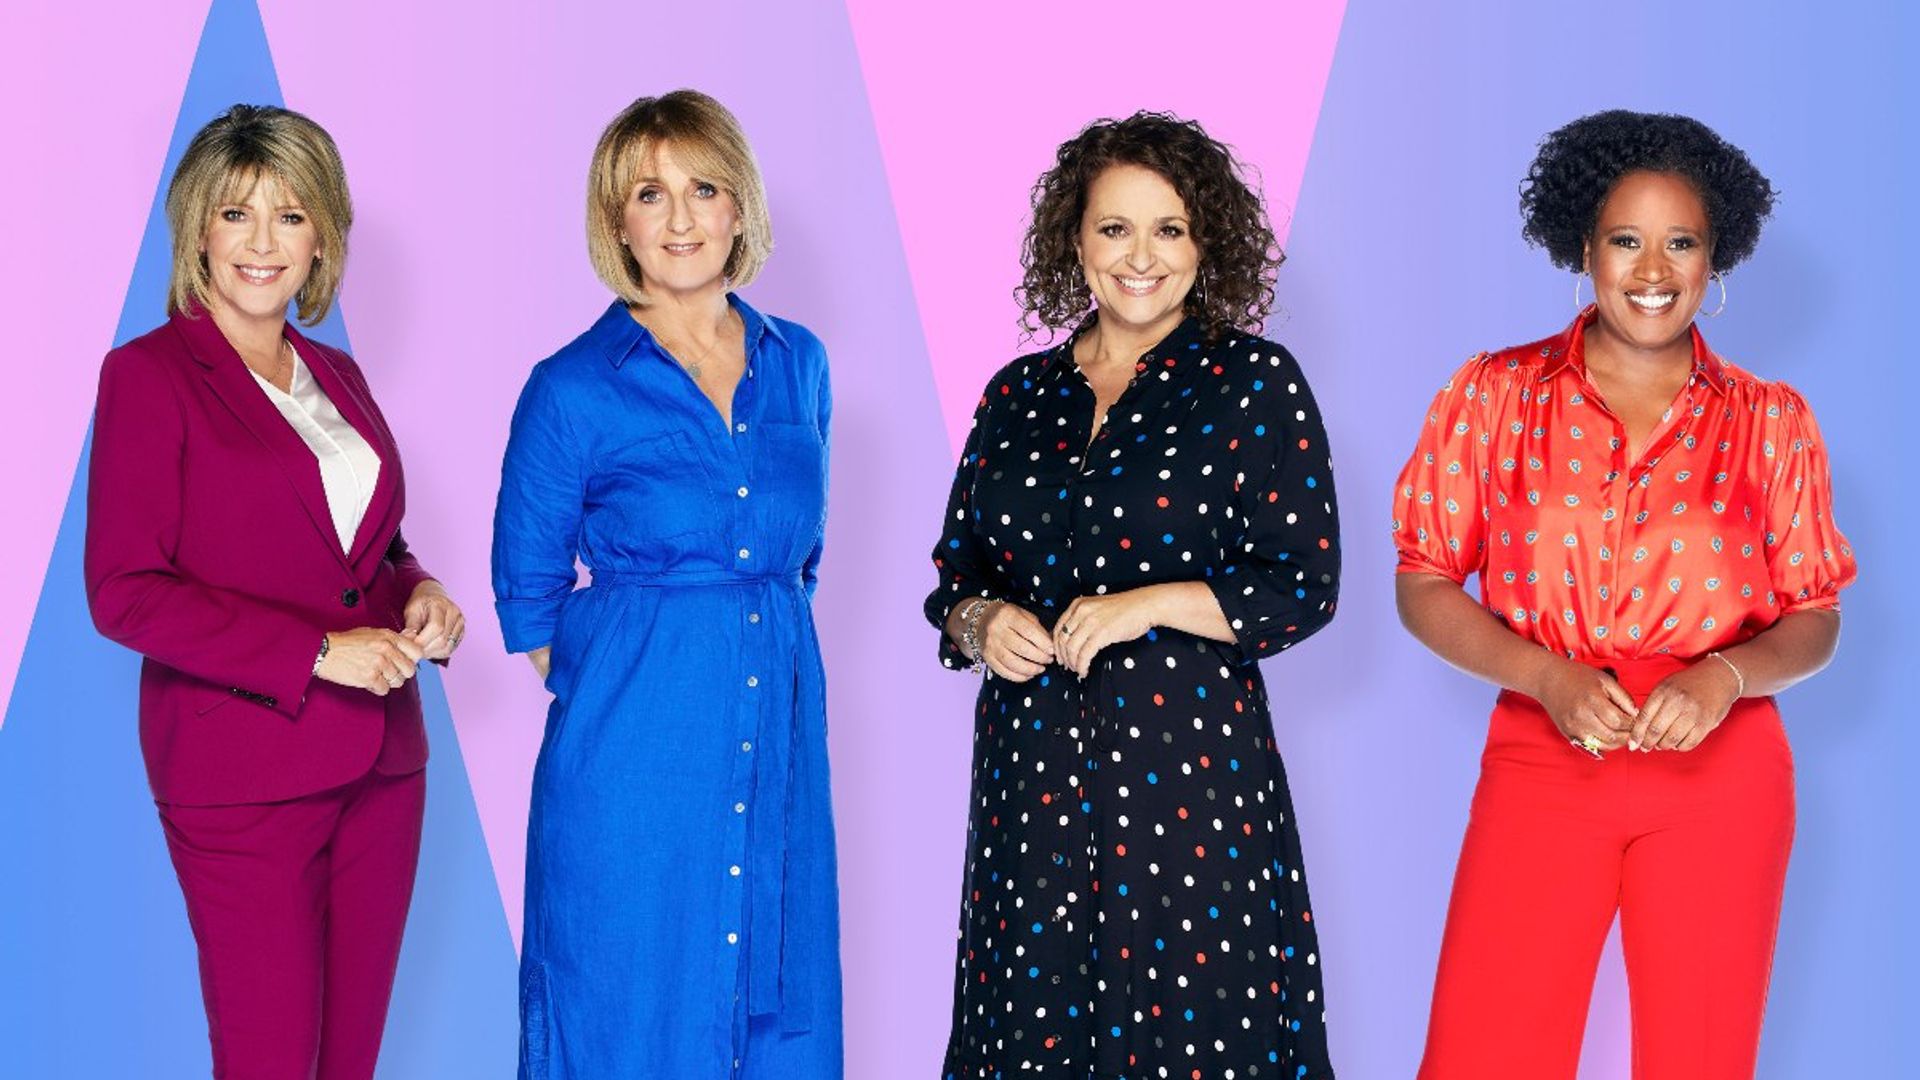 Strictly Come Dancing star to join Loose Women panel